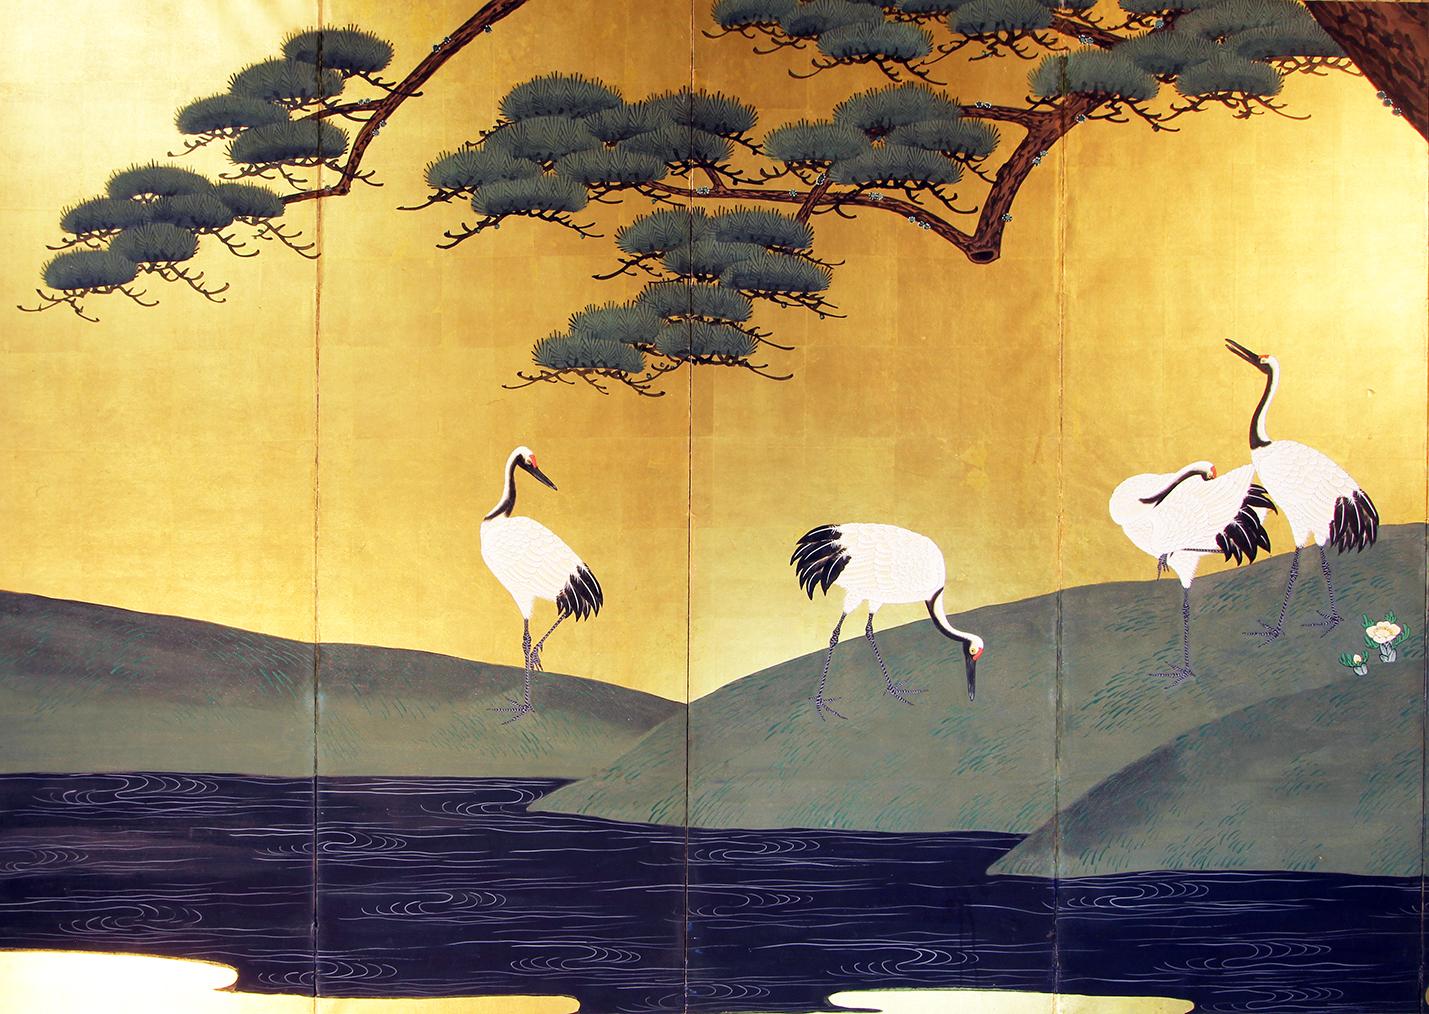 This Japanese screen is a beautiful example of a landscape with a large pine tree, cranes in the water, it gives off a pleasant feeling of harmony in nature.
The work is from the end of the Edo period, the artist is unknown, but certainly from the